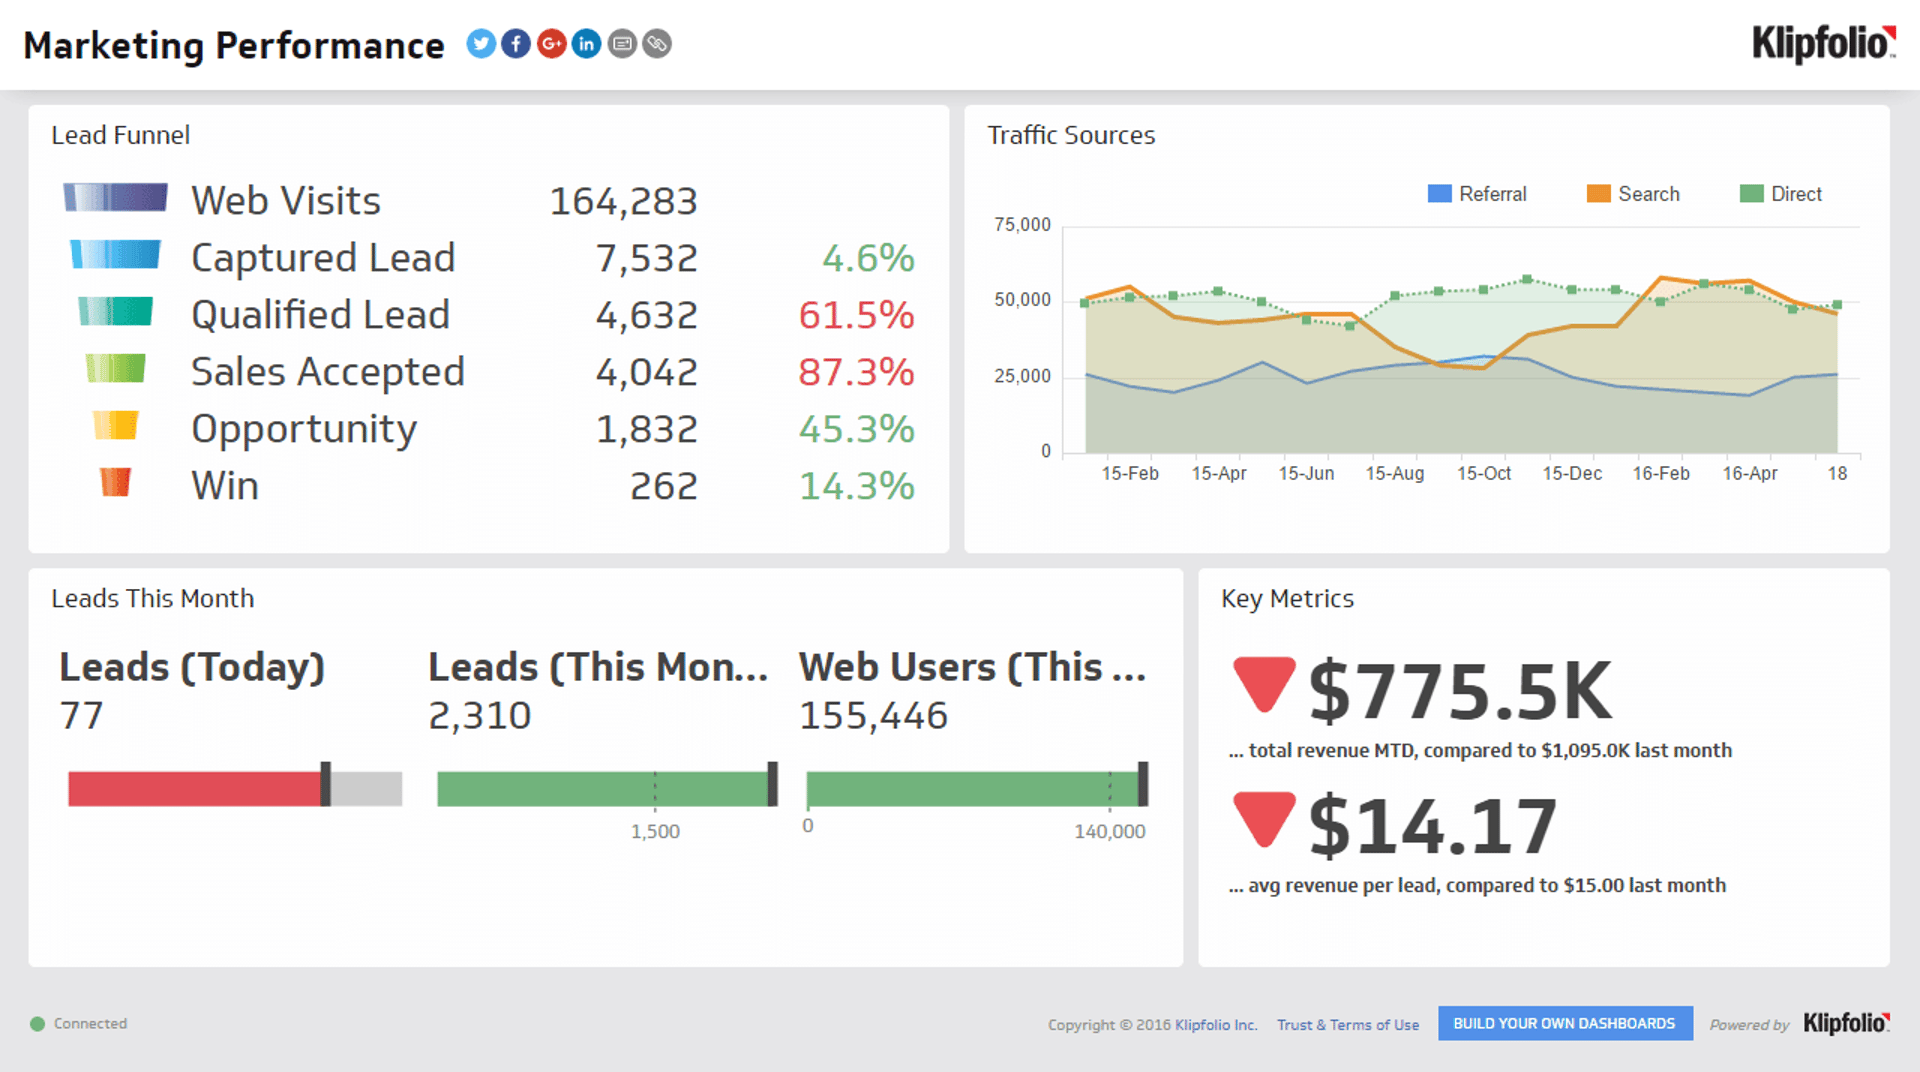 Related Dashboard Examples - Marketing Performance Dashboard